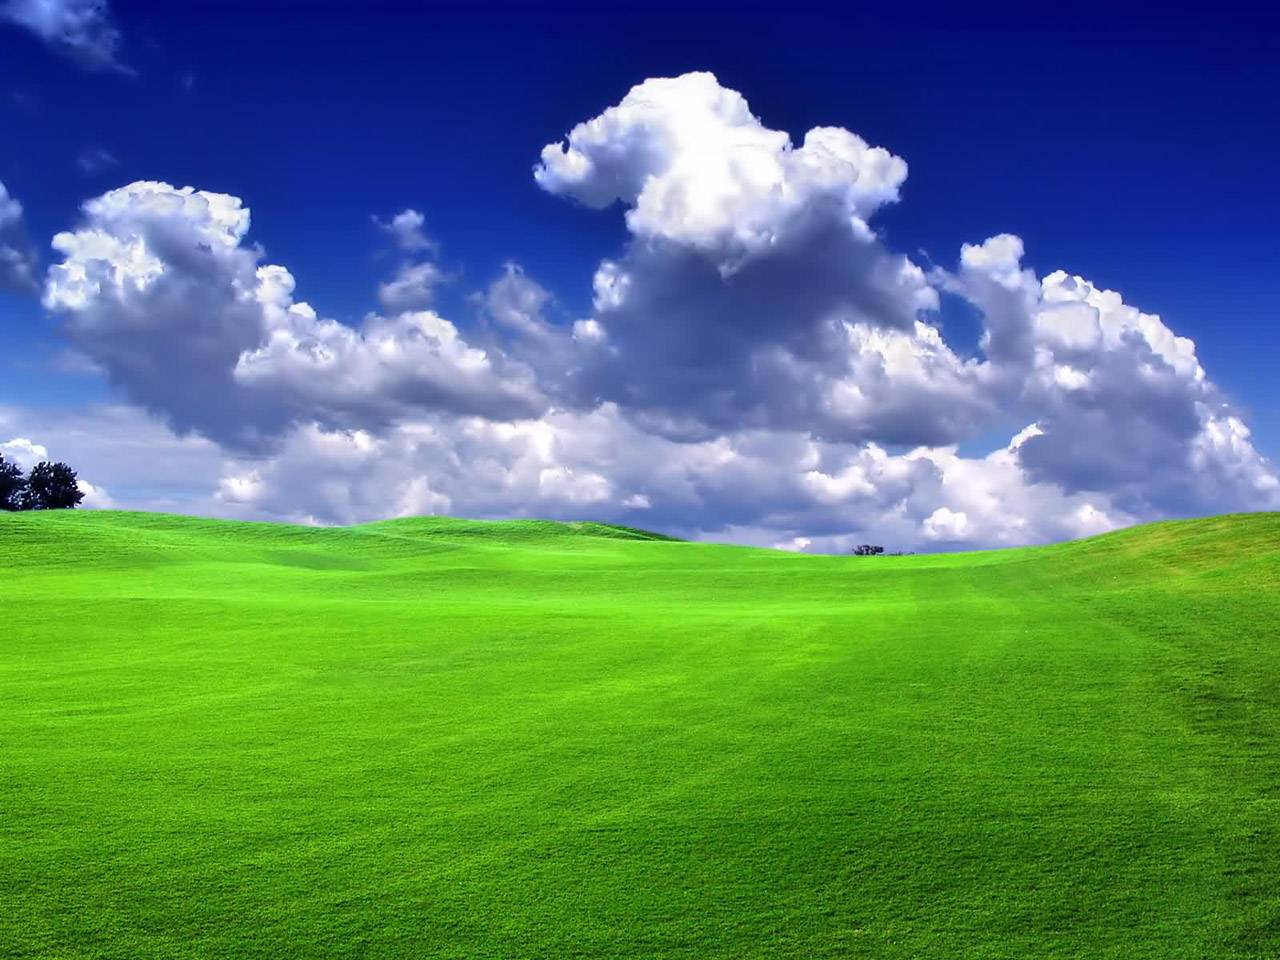 Nature Wallpapers Desktop Full Size Hq Image 12 HD Wallpapers